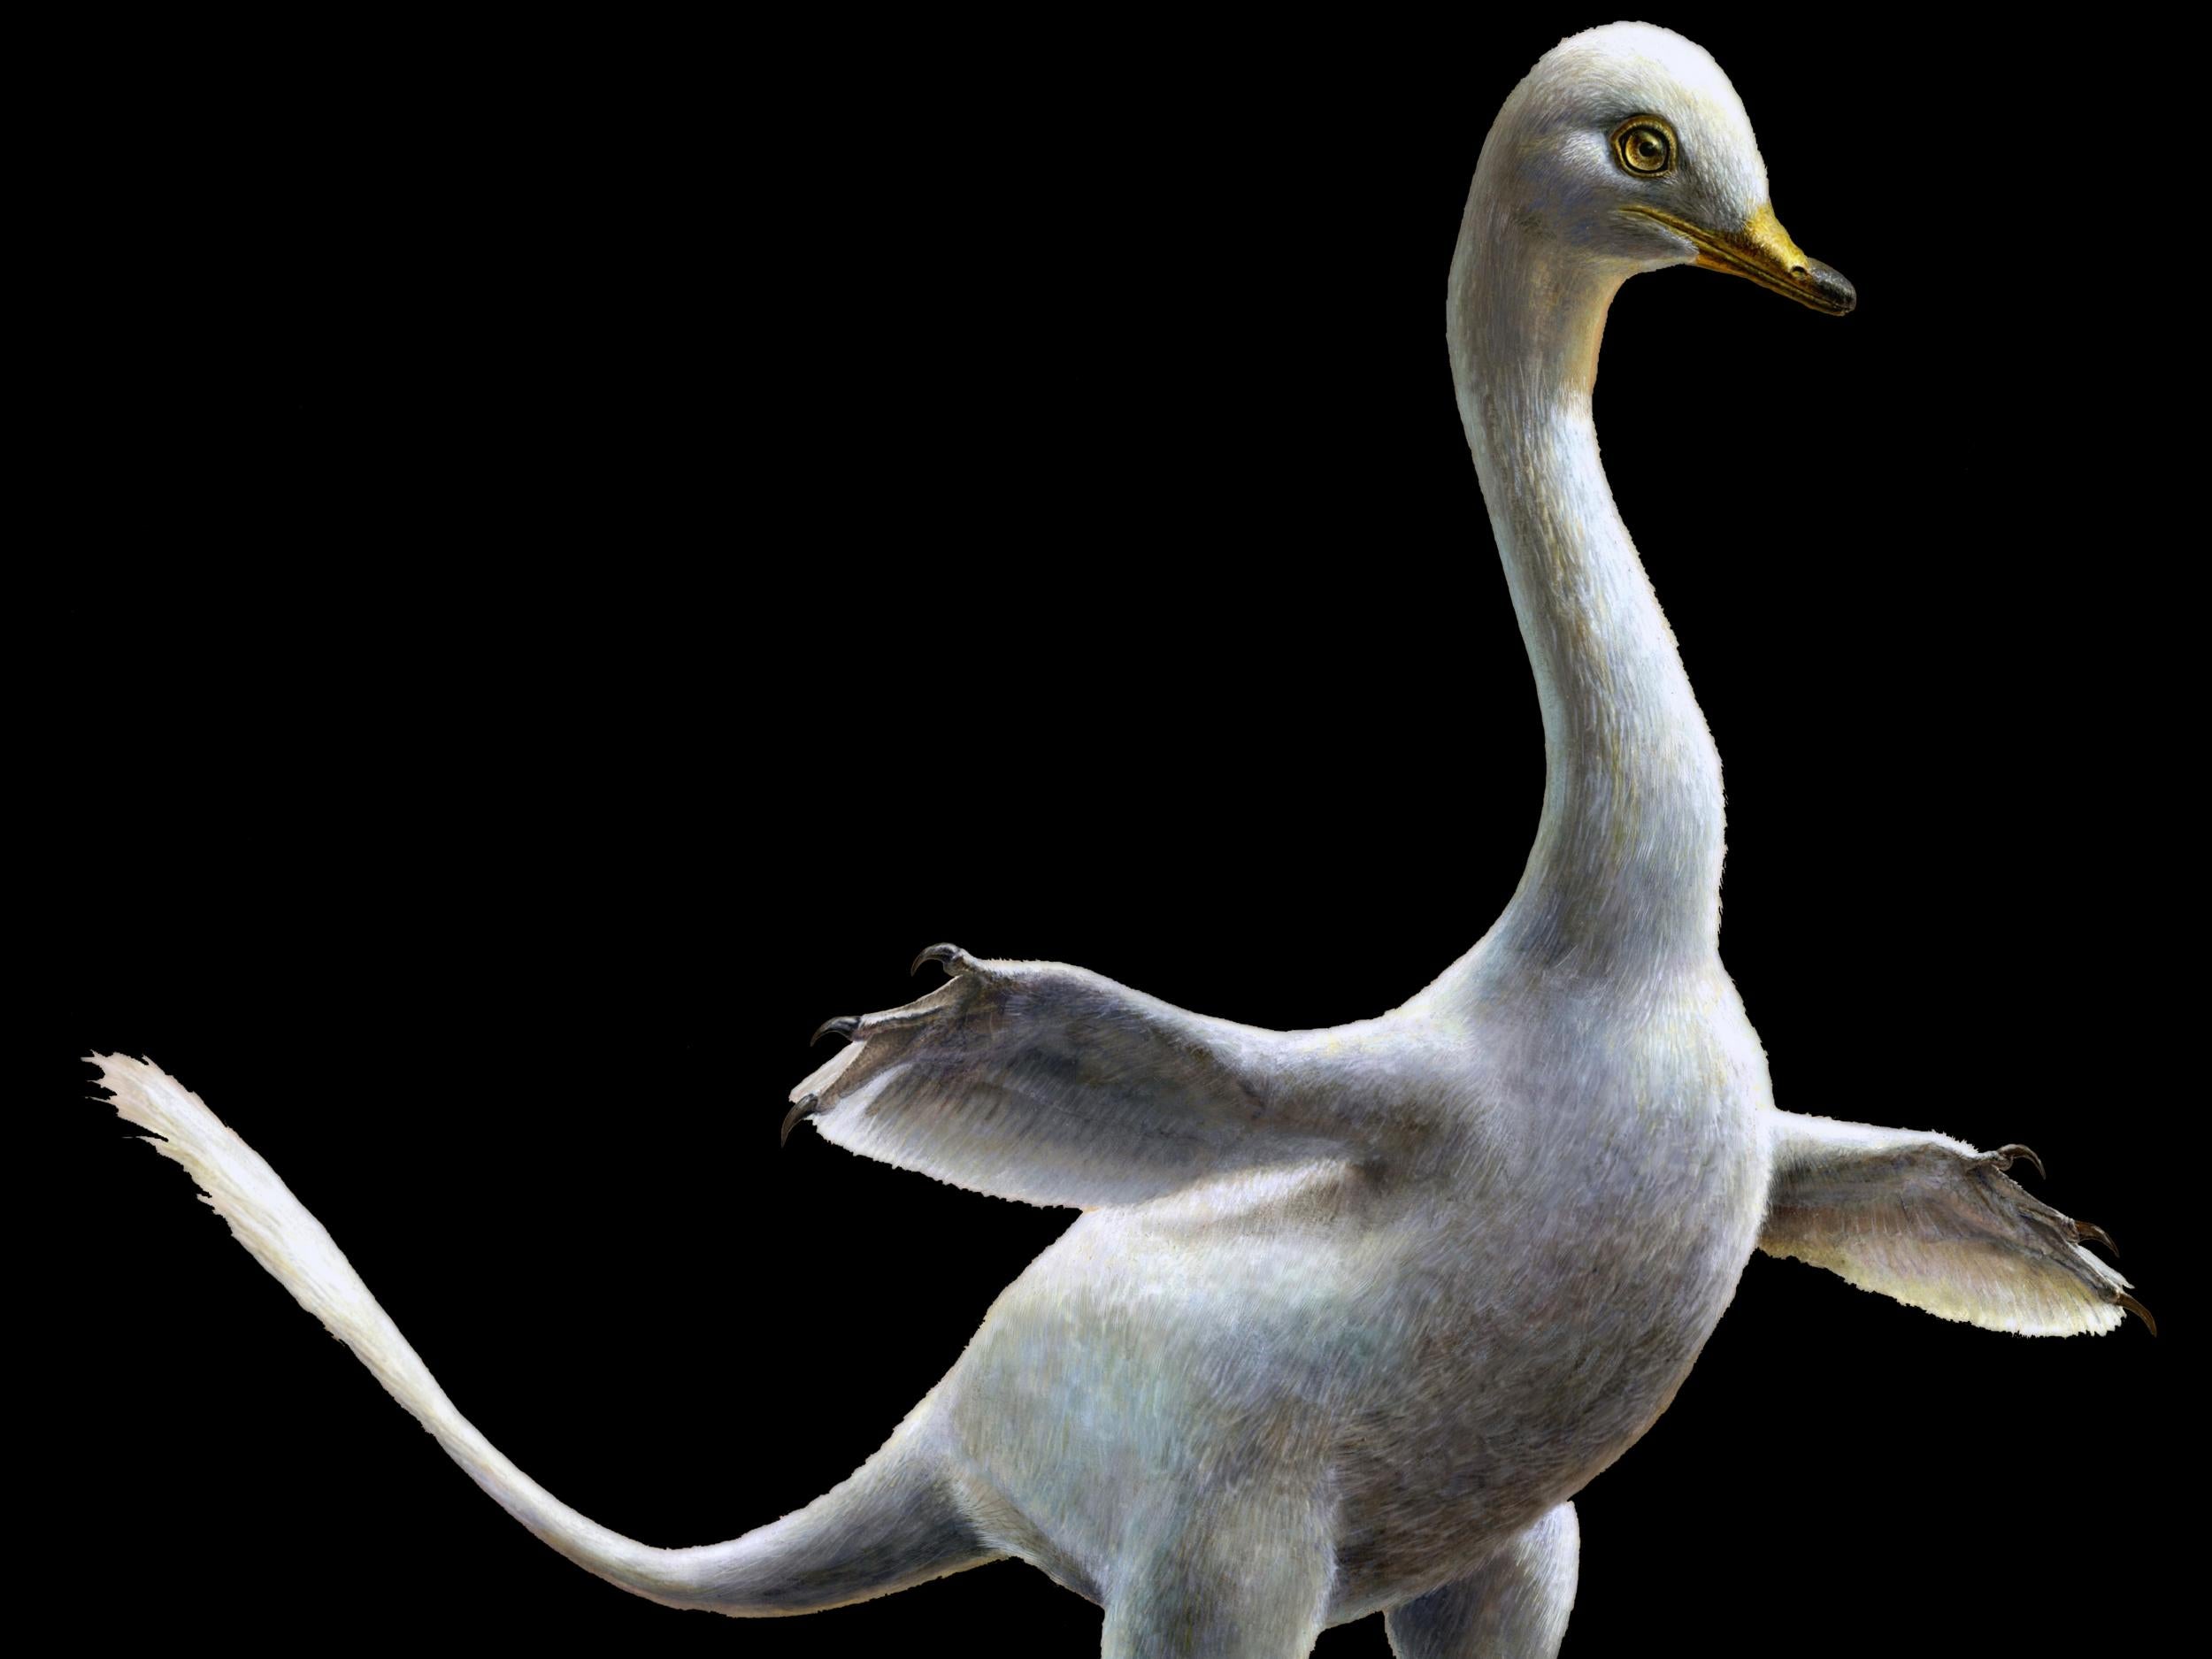 The newly identified Halszkaraptor escuilliei has a body shape that suggests a lifestyle similar to modern aquatic birds